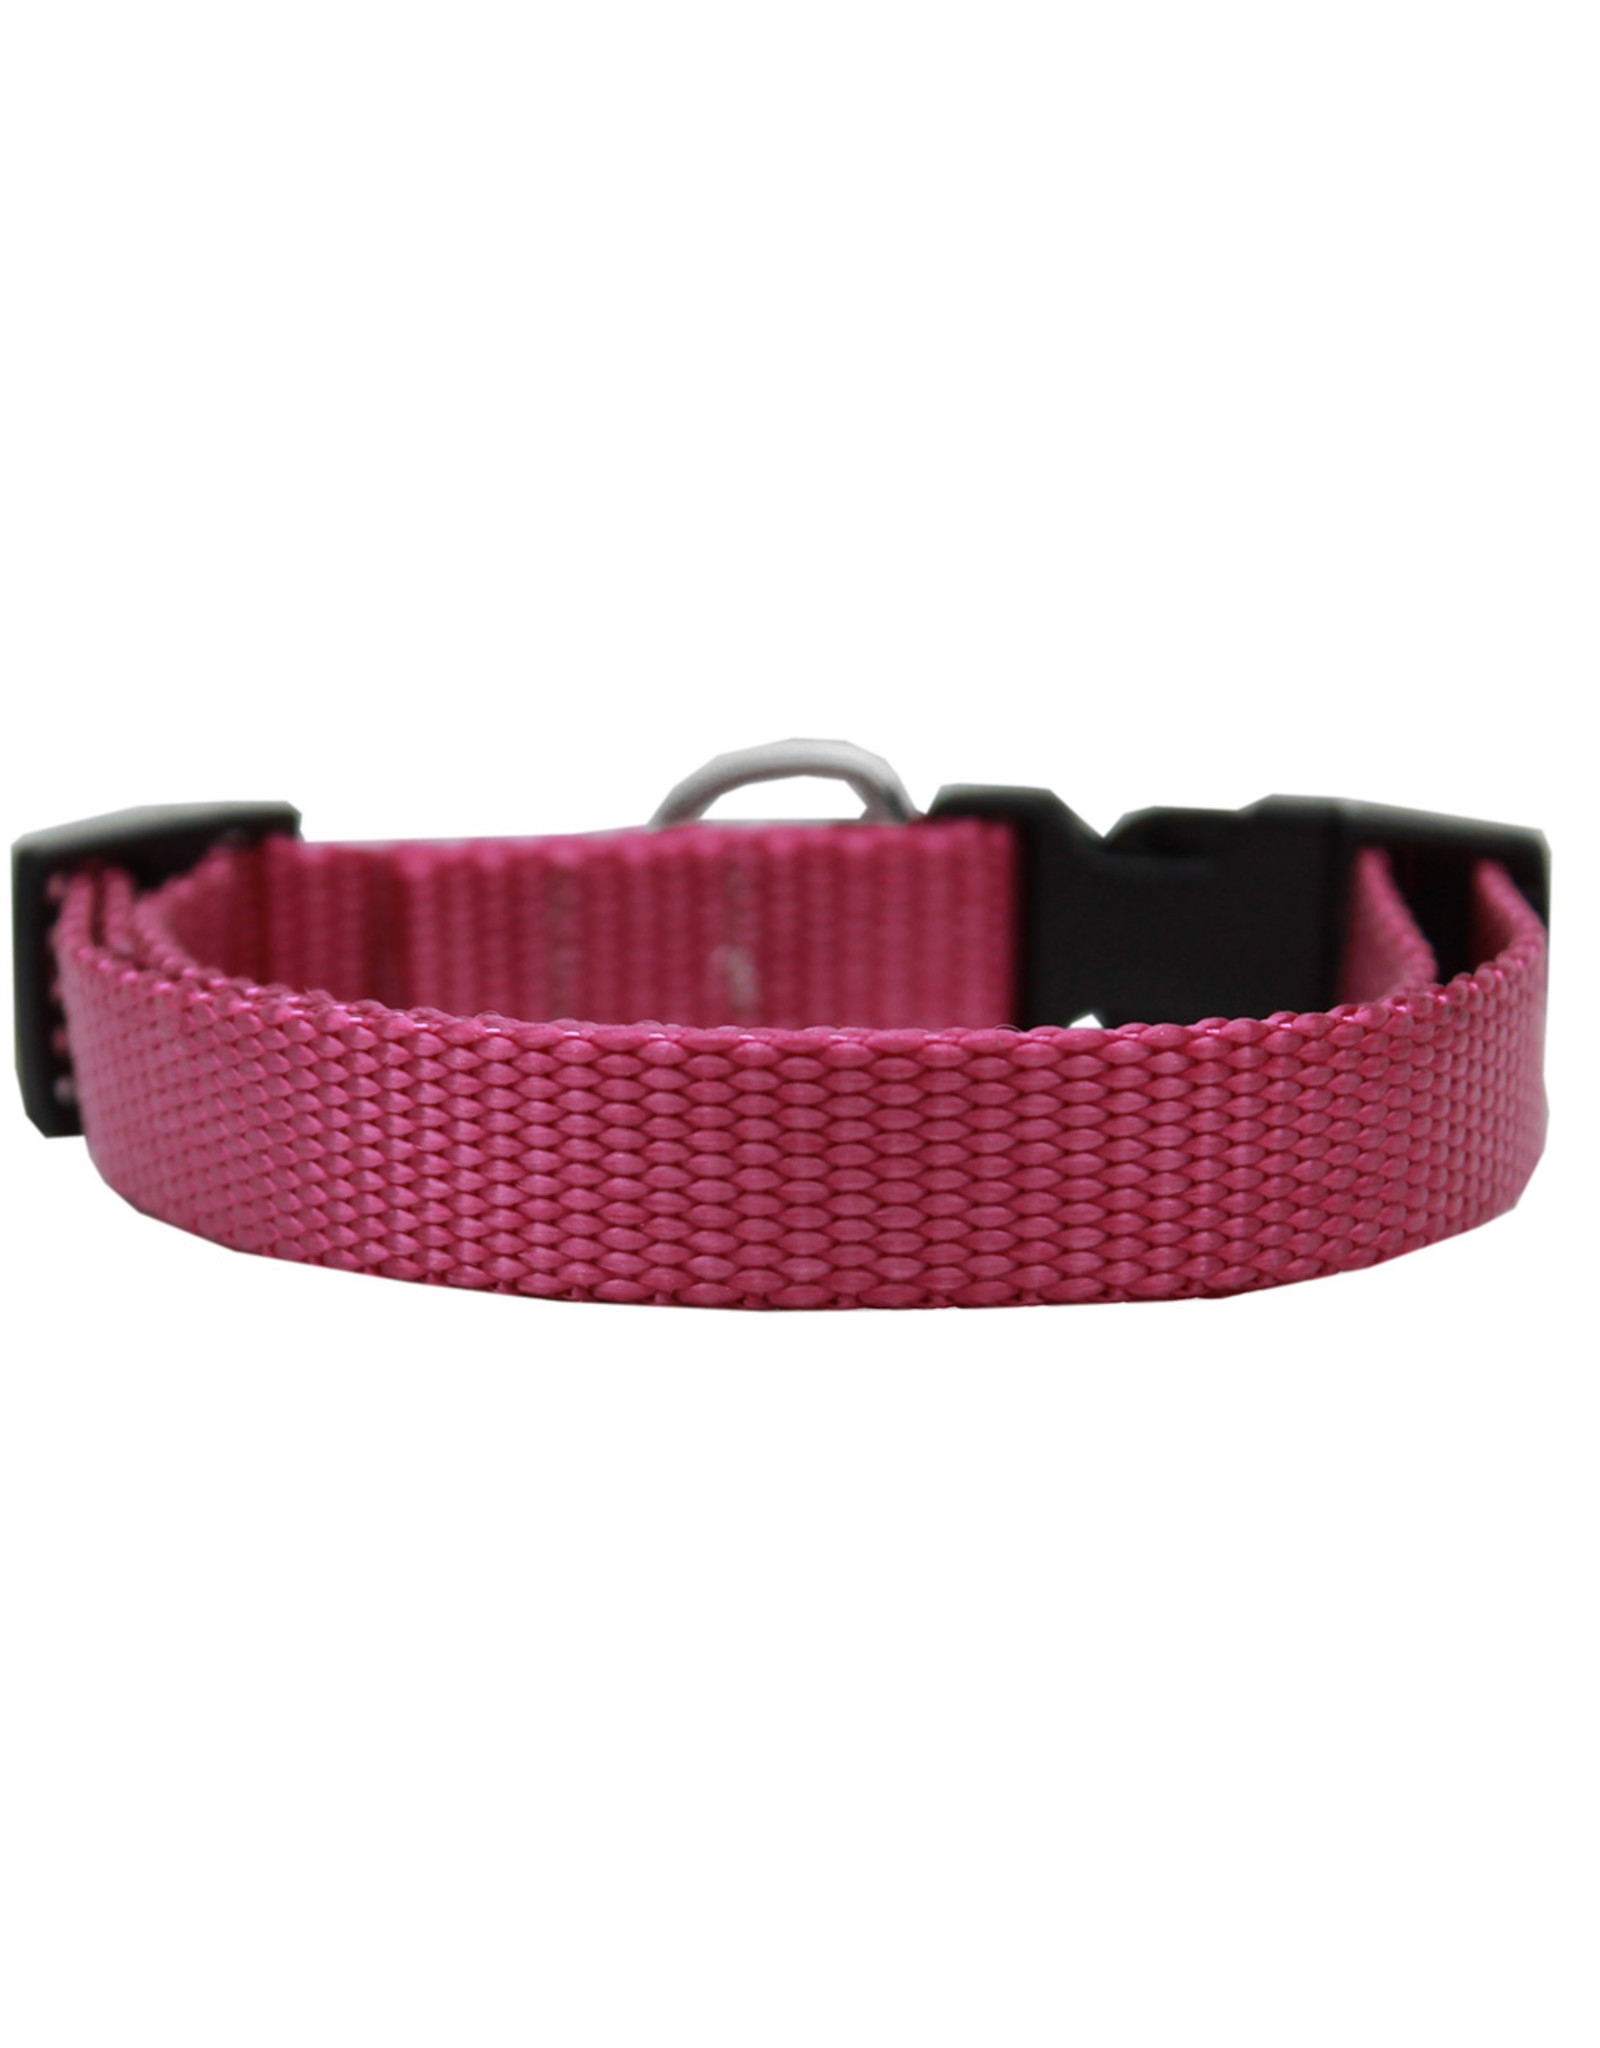 Mirage Pet Products MIRAGE PET PRODUCTS PLAIN NYLON SAFETY CAT COLLAR